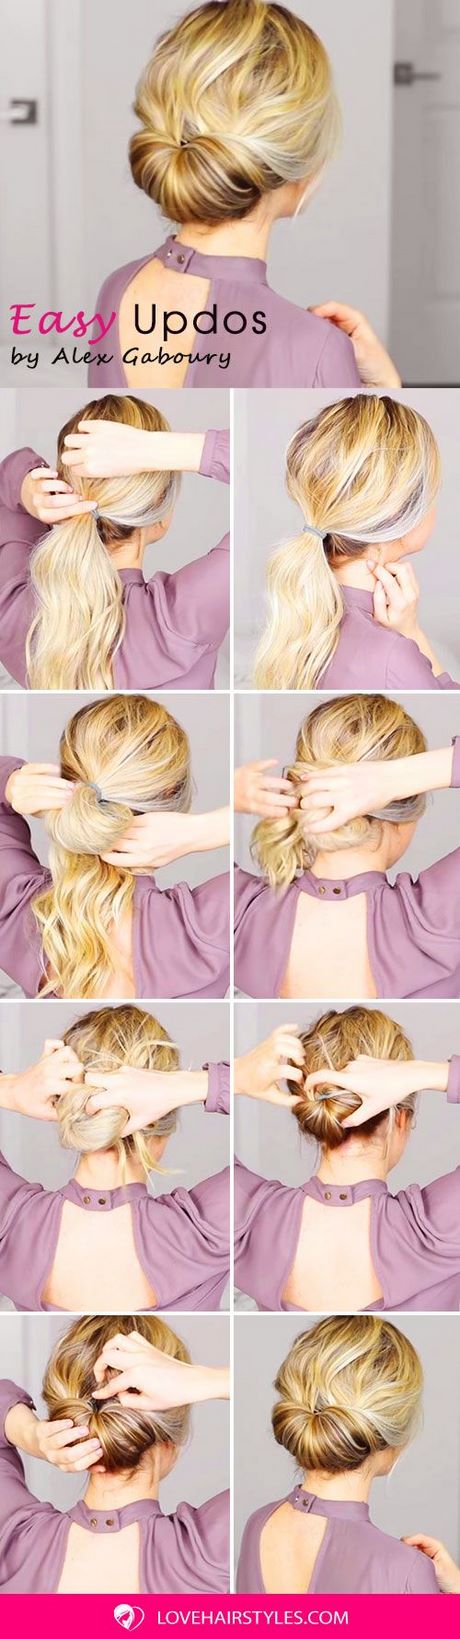 Quick and easy updos for medium length hair quick-and-easy-updos-for-medium-length-hair-19_13